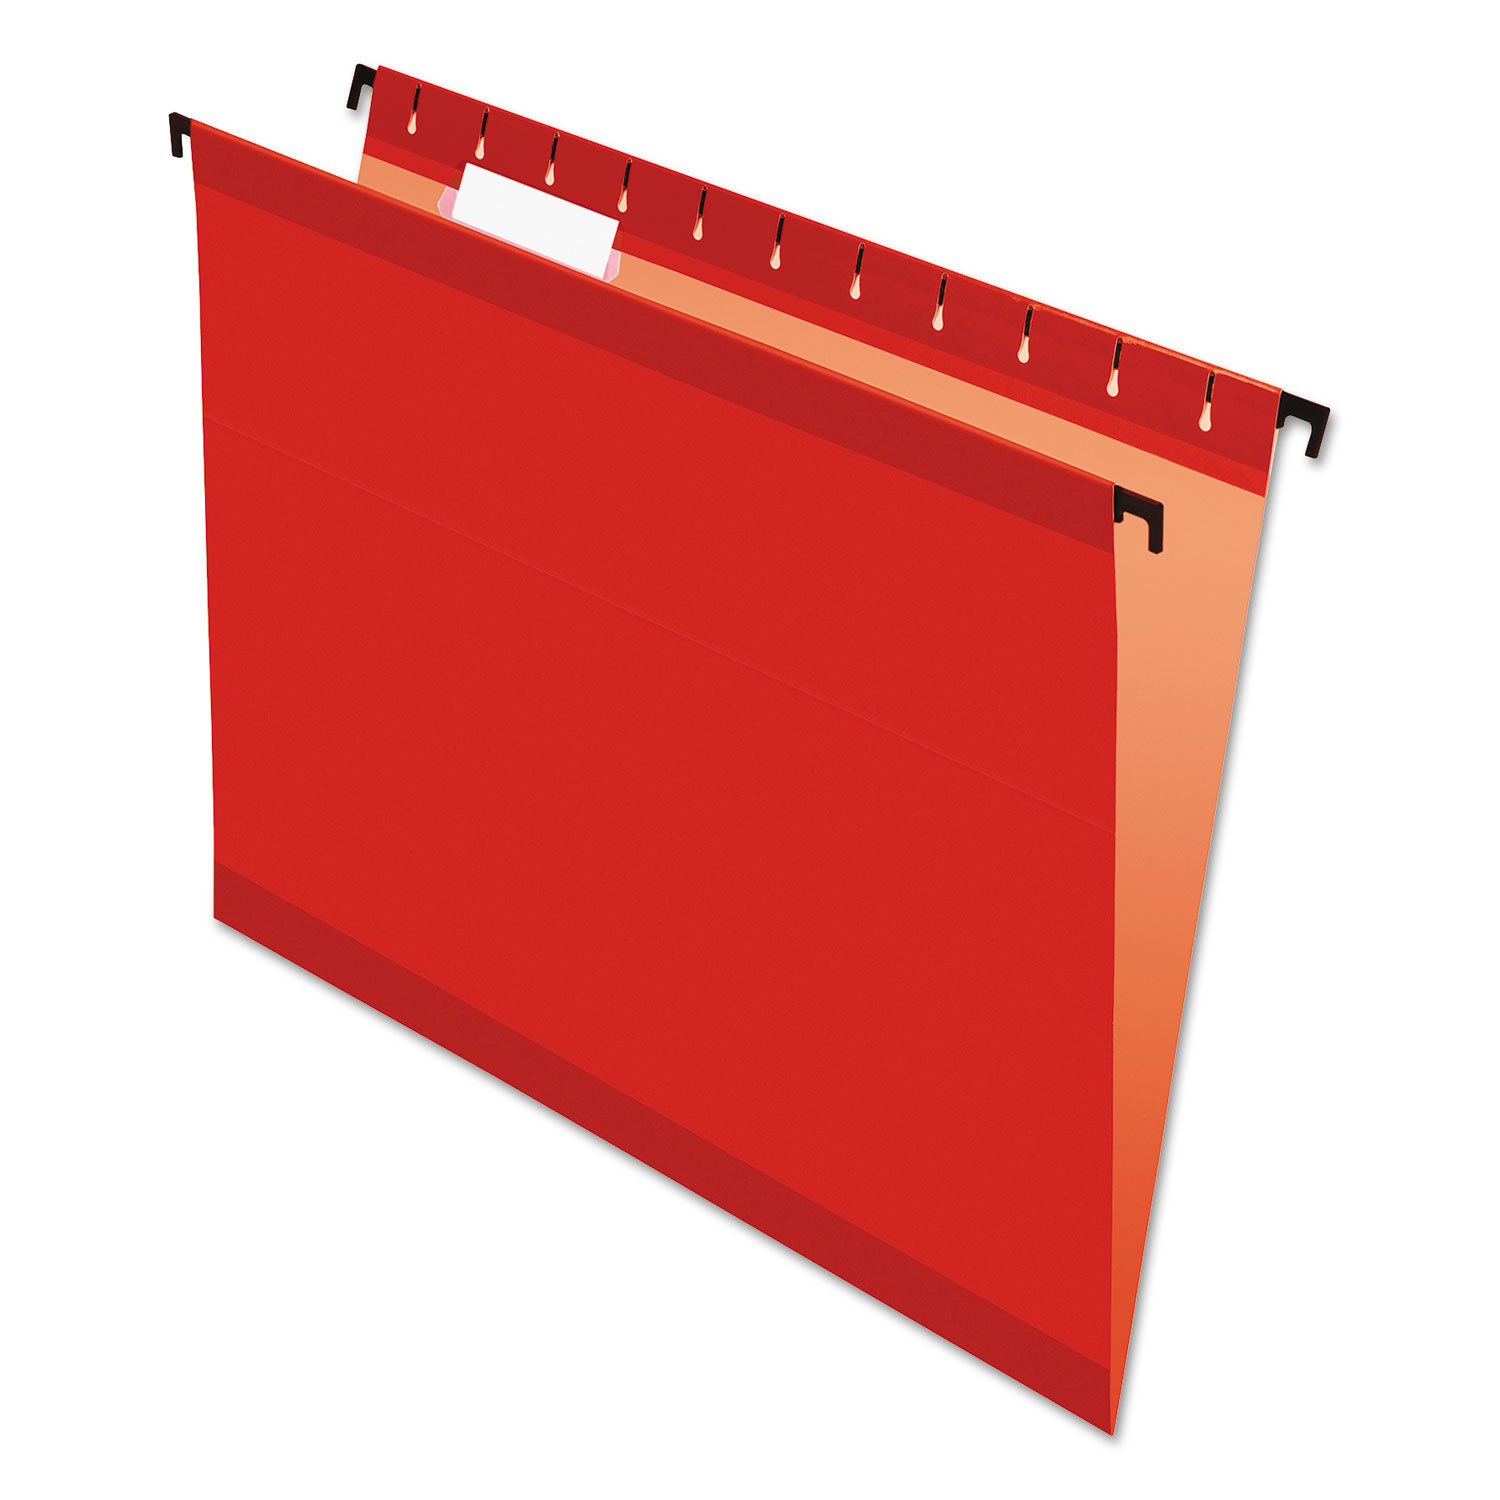  Pendaflex 6152 1/5 RED SureHook Hanging Folders, Letter Size, 1/5-Cut Tab, Red, 20/Box (PFX615215RED) 